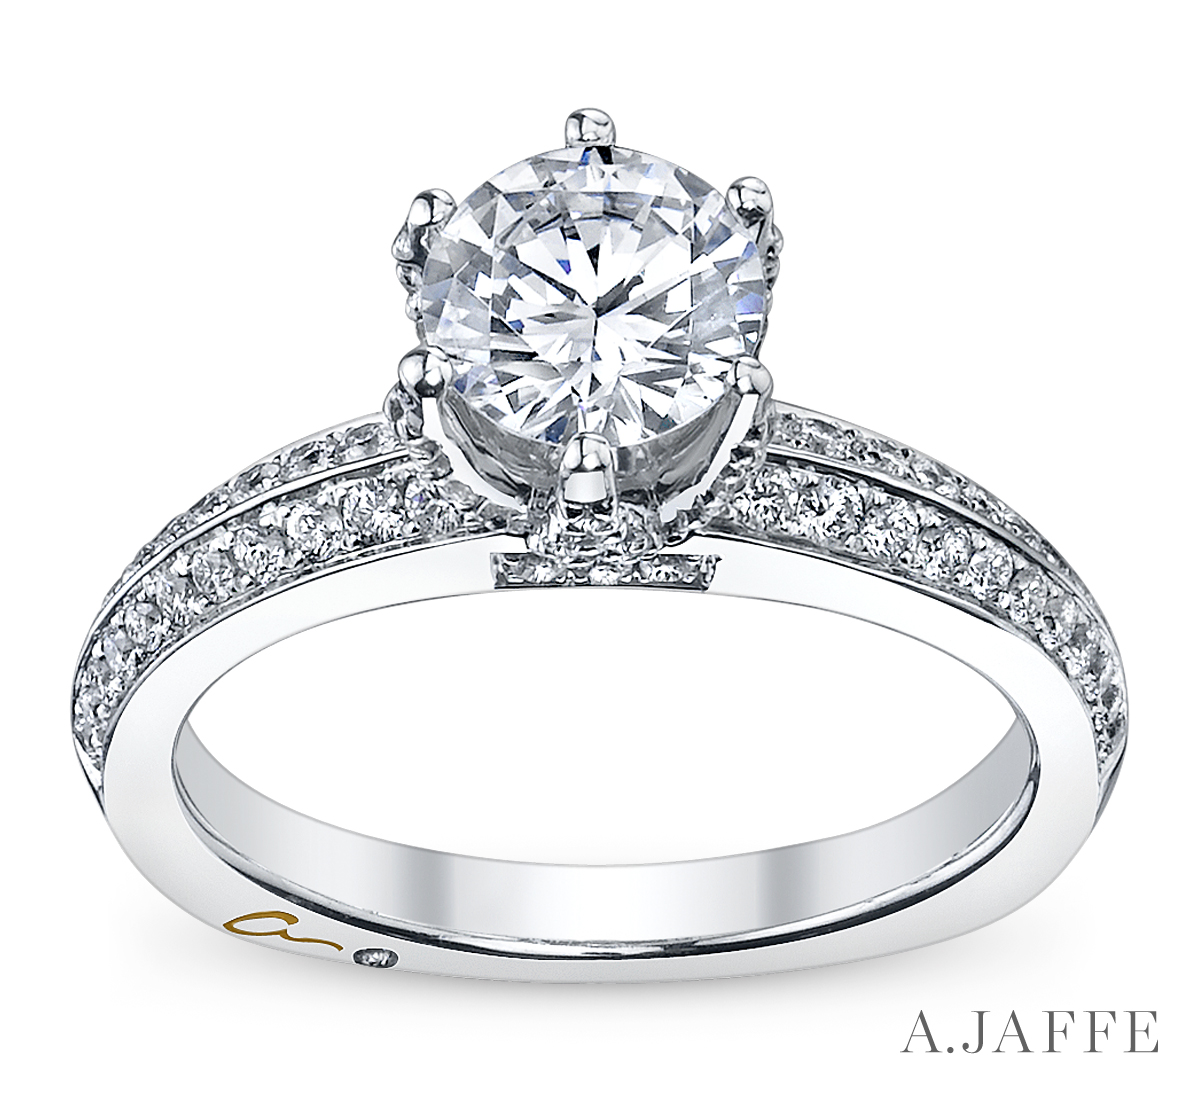 Engagement Ring of the Day–A. Jaffe